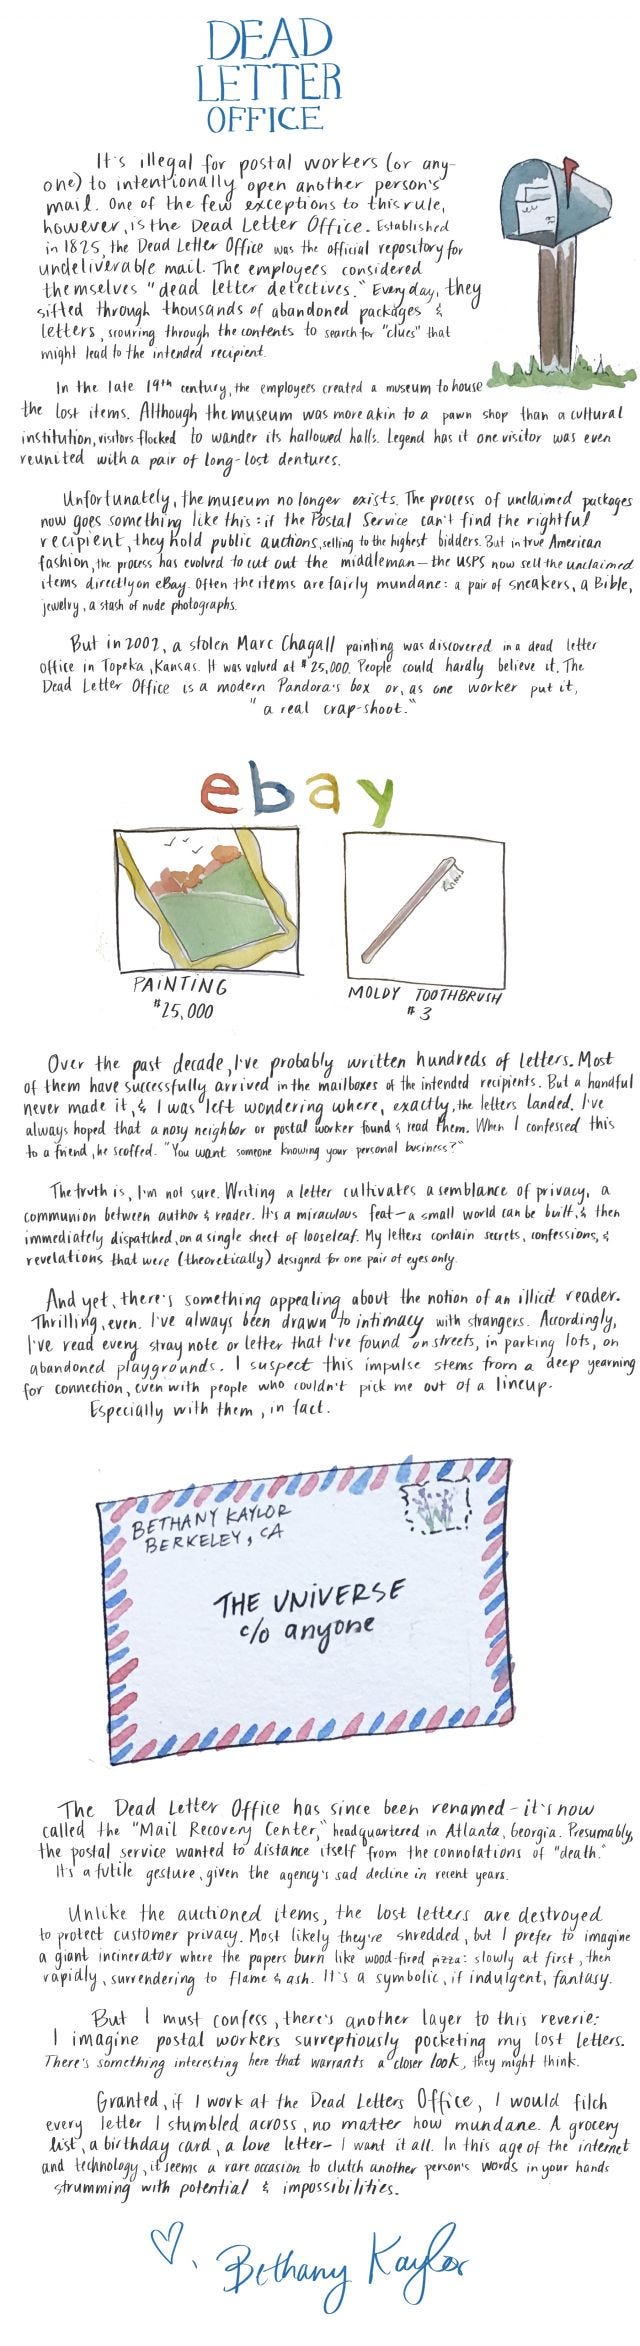 Dead Letter Office, an illustrated newsletter by Bethany Kaylor